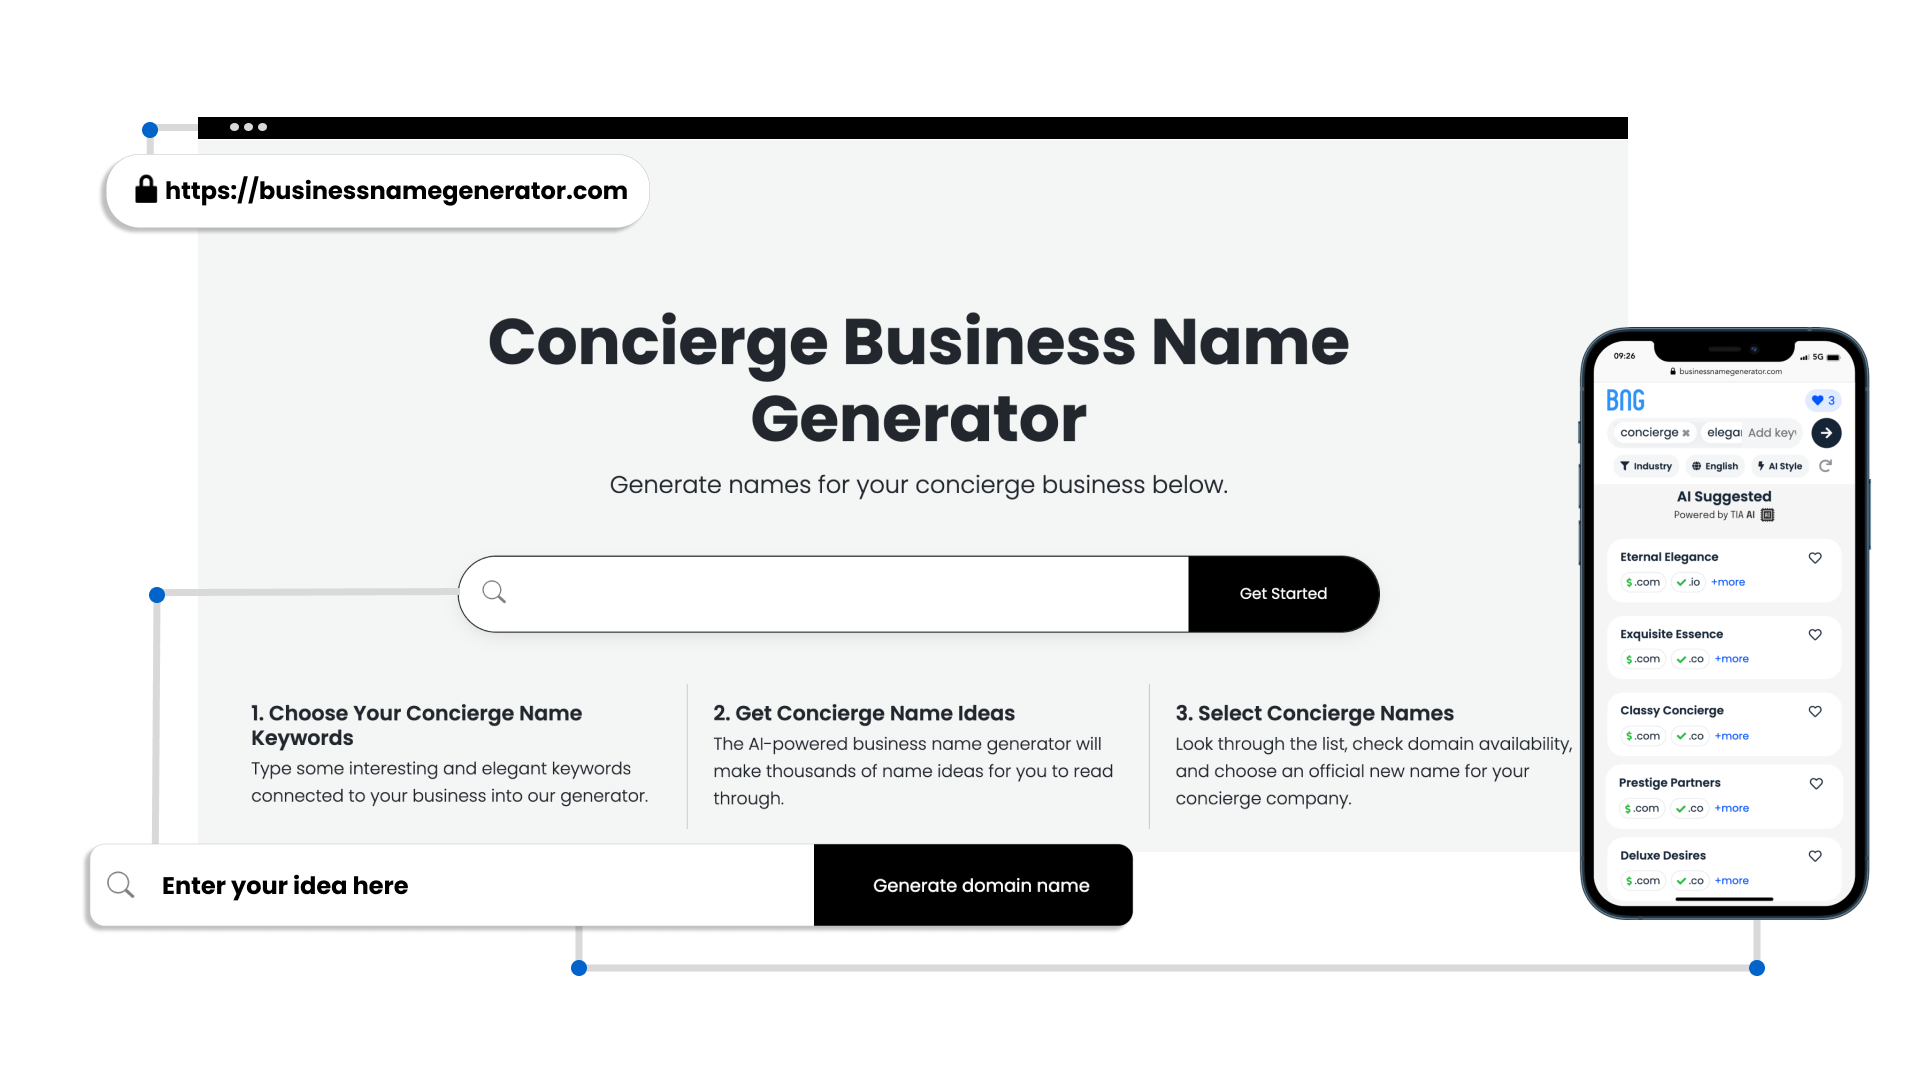 Benefits of Our Concierge Business Name Generator